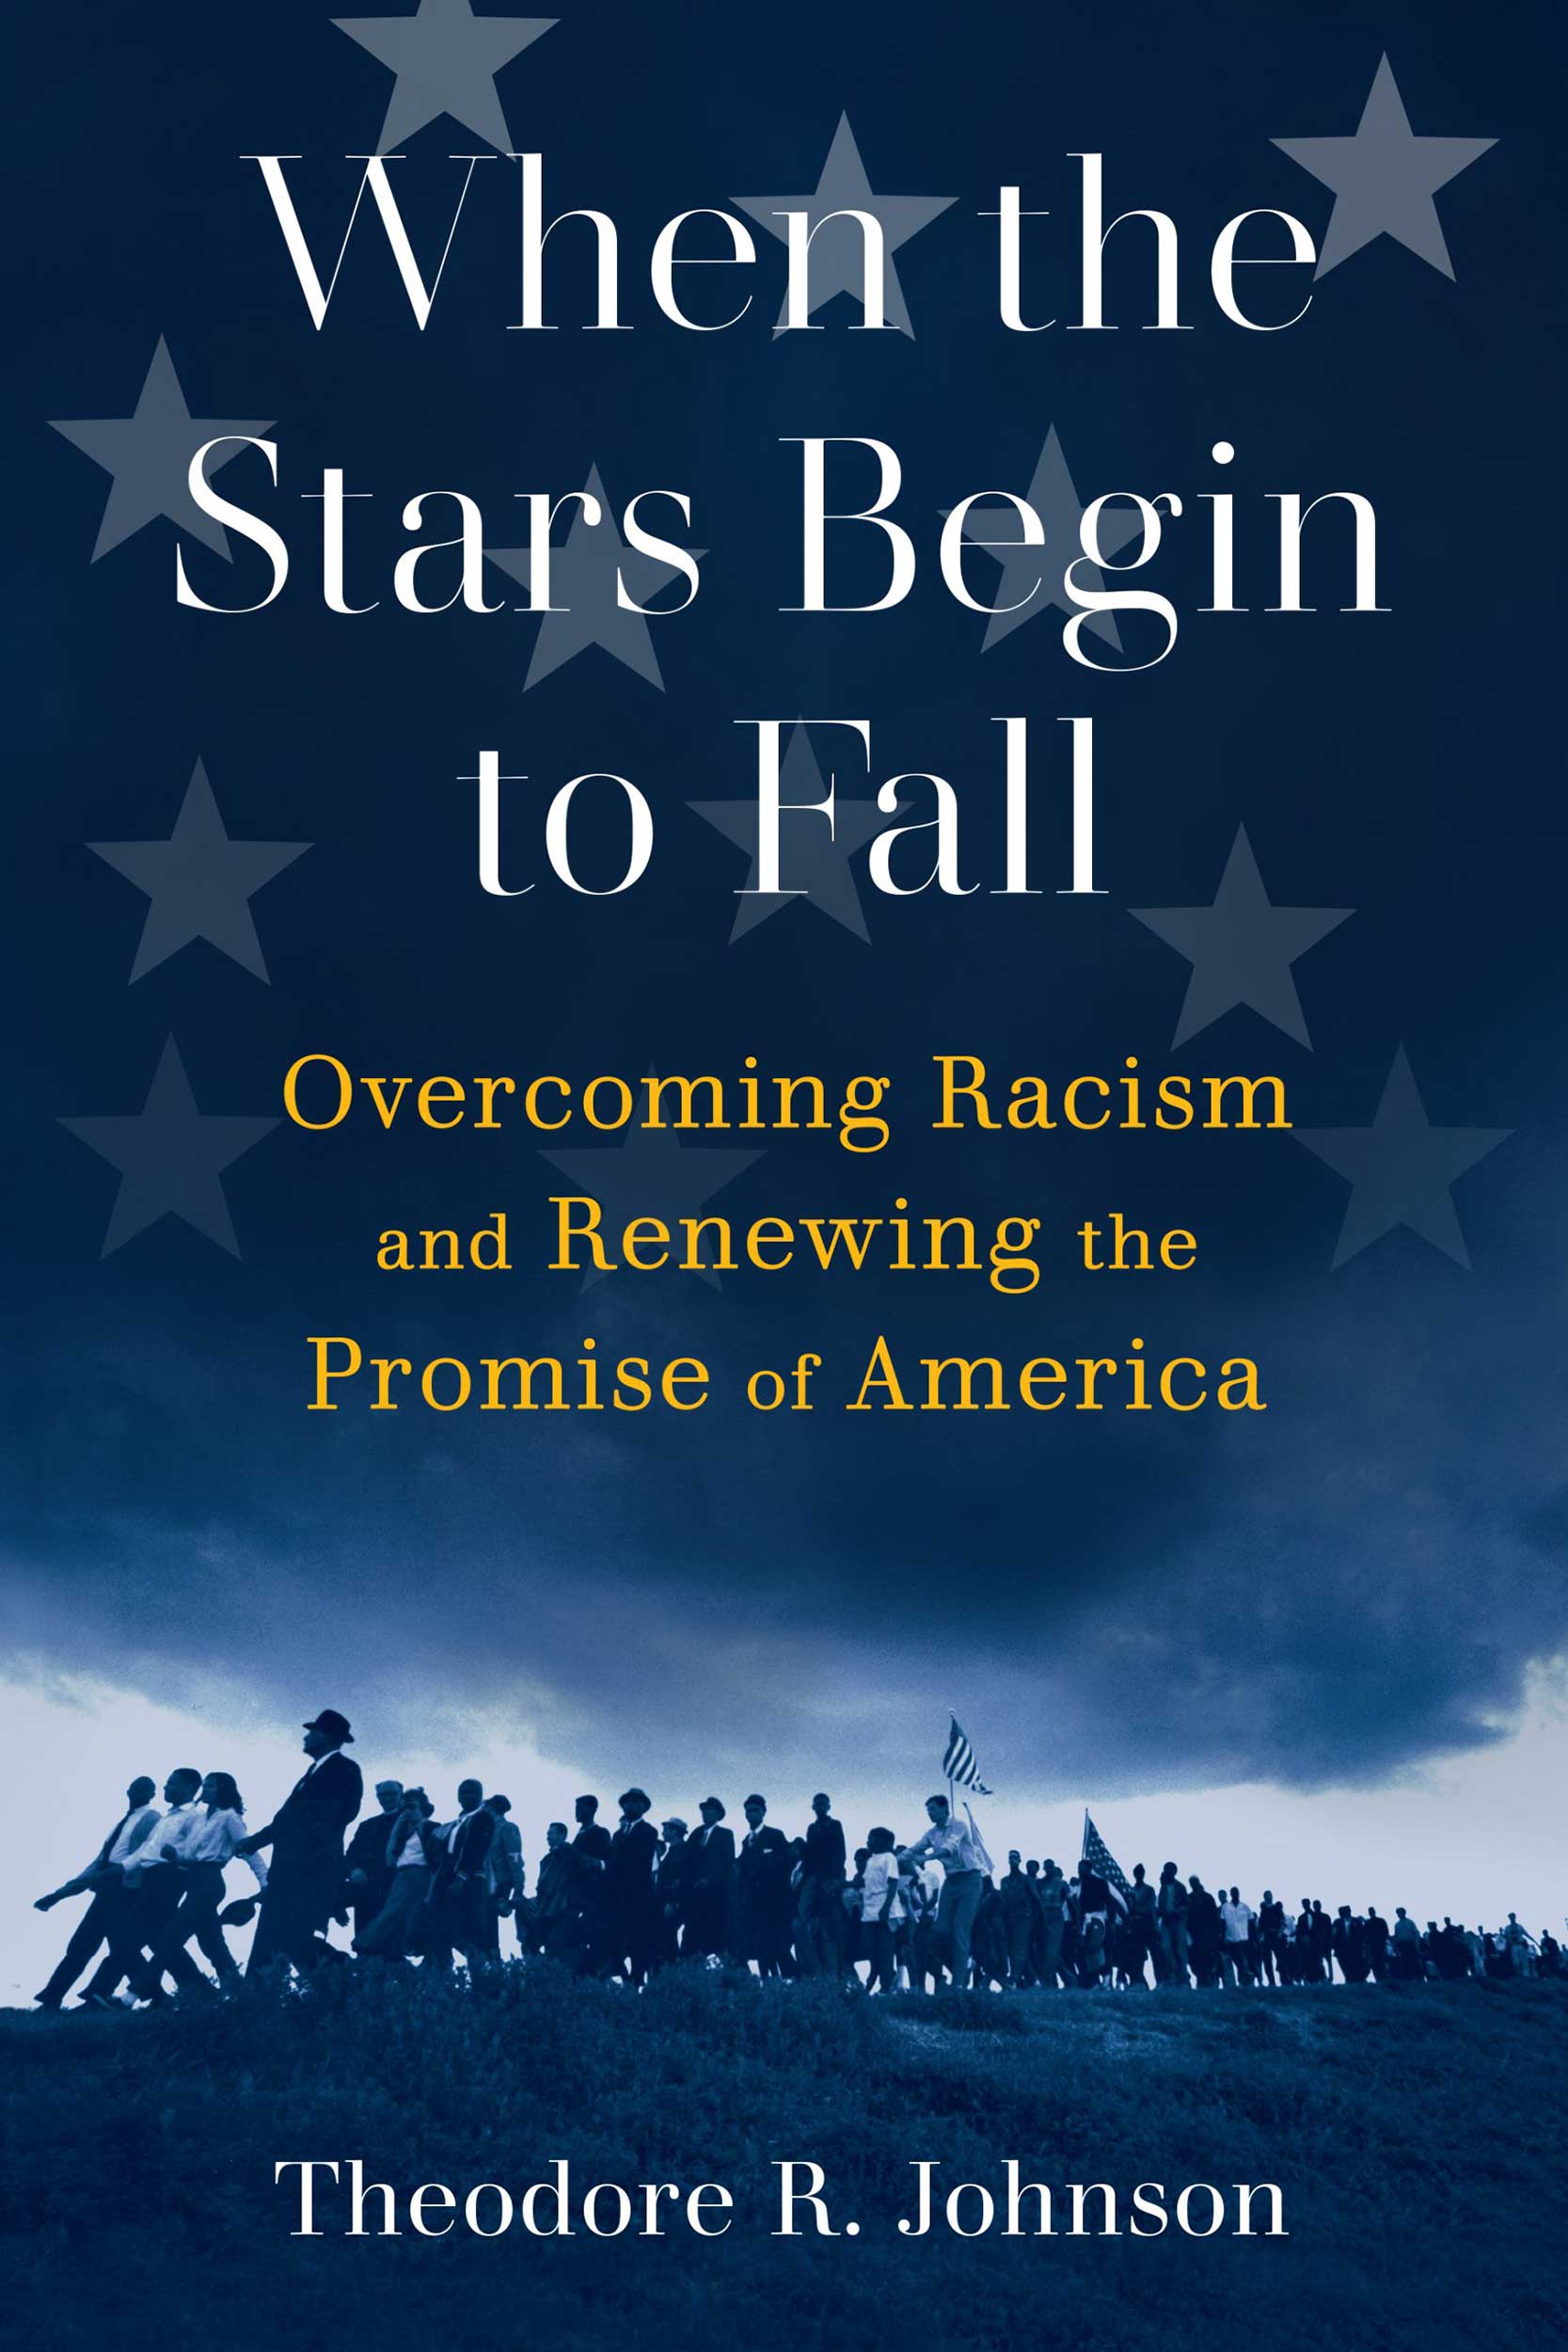 Stars Begin to Fall book cover.